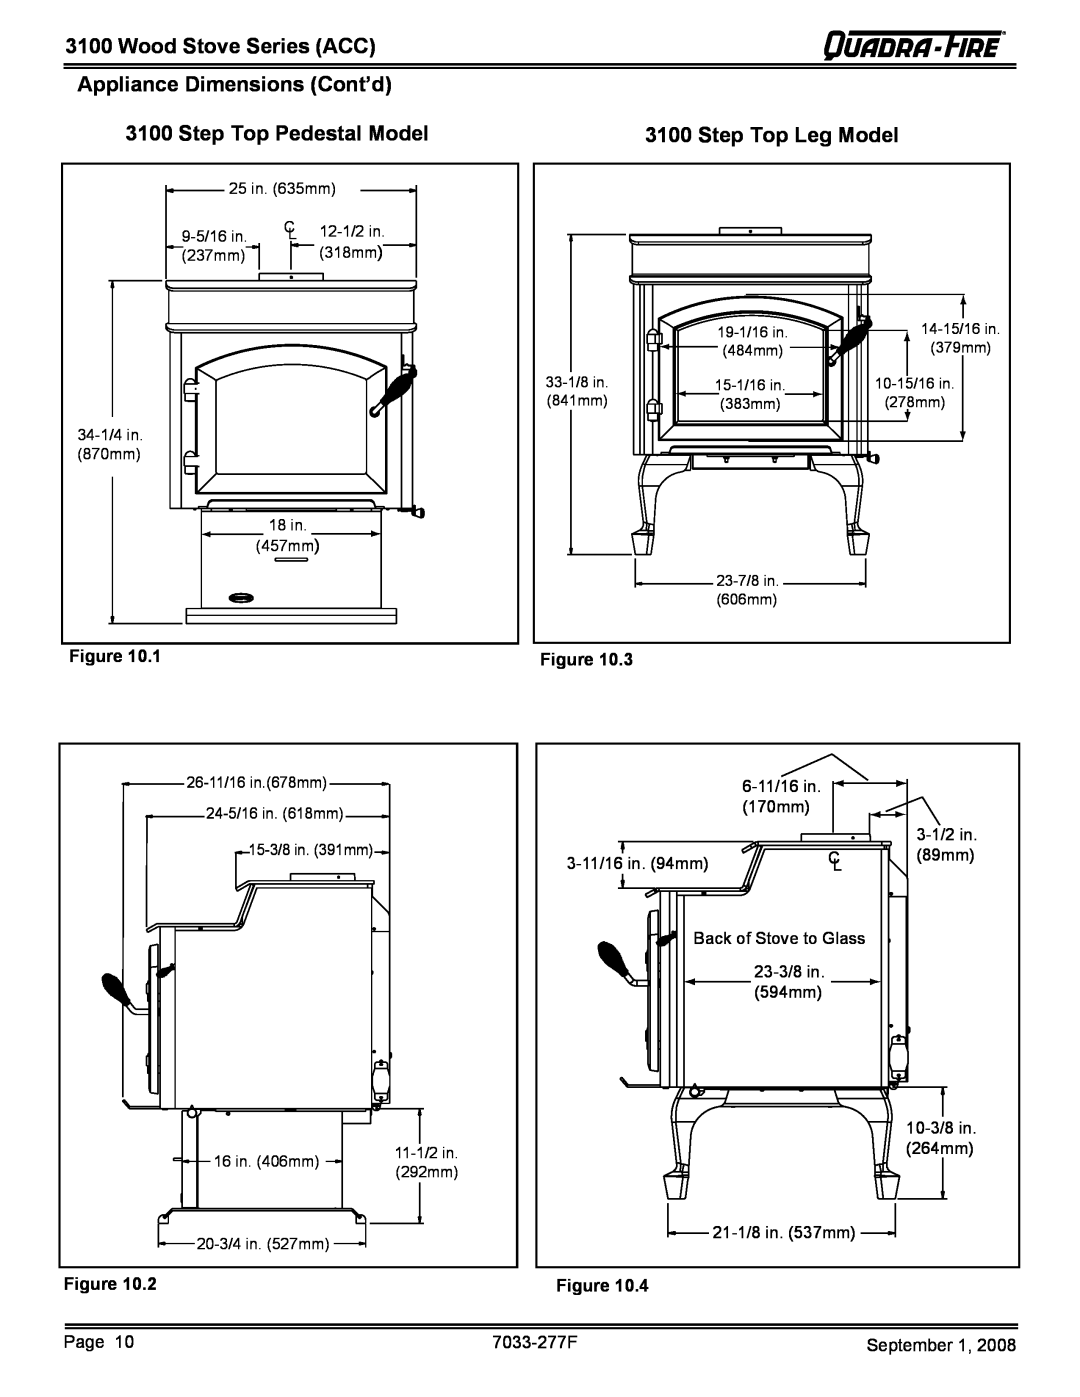 Hearth and Home Technologies 31ST-ACC Wood Stove Series ACC Appliance Dimensions Cont’d, Step Top Pedestal Model 